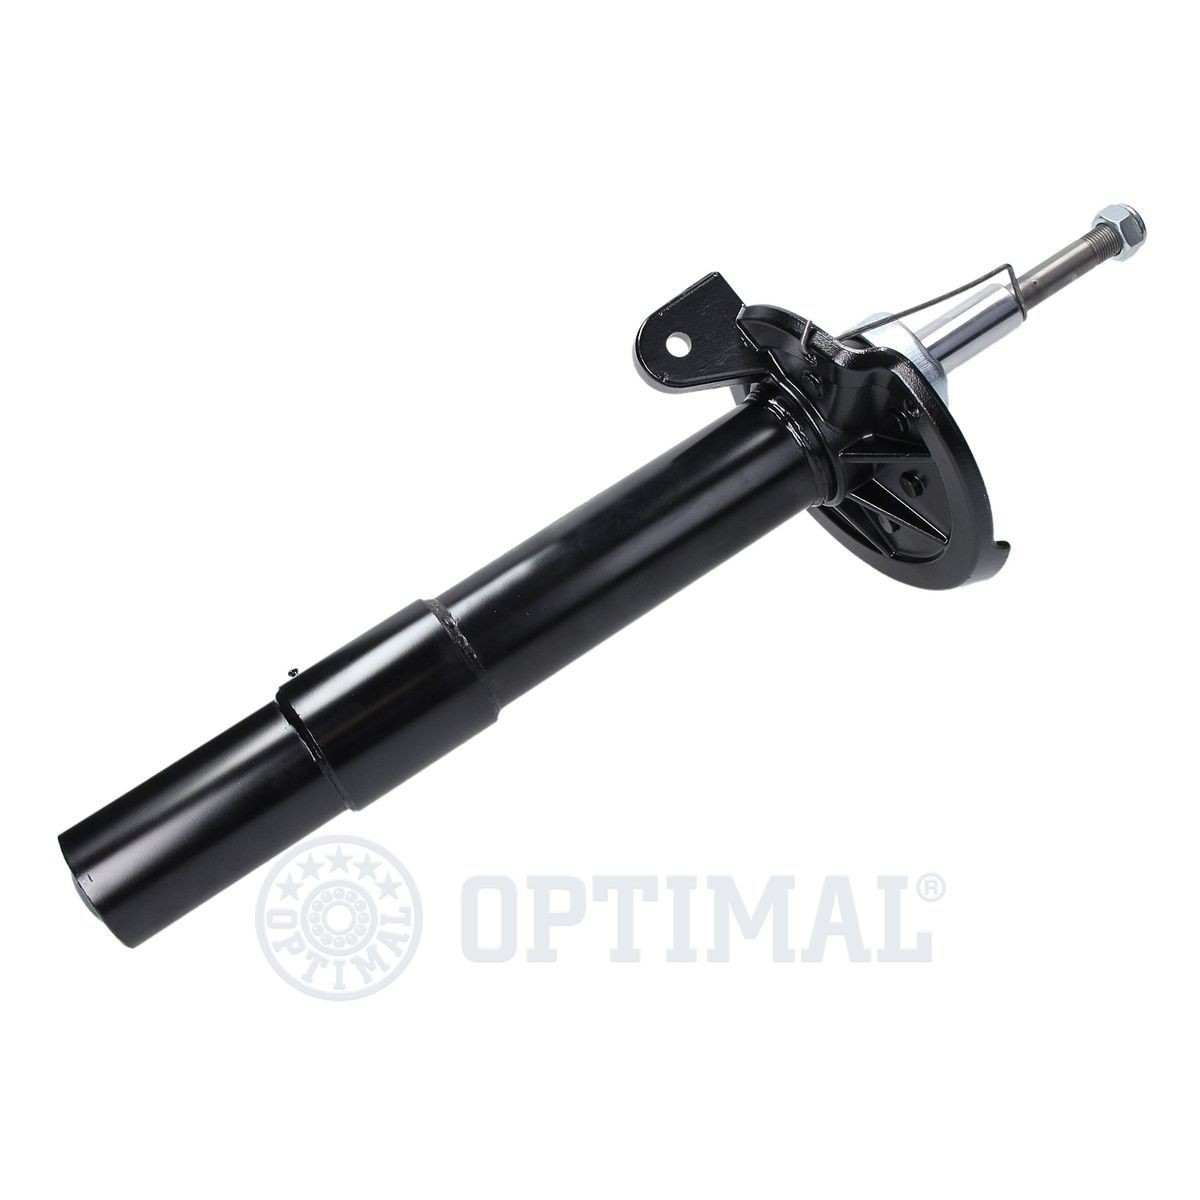 OPTIMAL A-3407GR Shock absorber Front Axle Right, Gas Pressure, Suspension Strut, Top pin, Bottom Clamp, M16x1.5